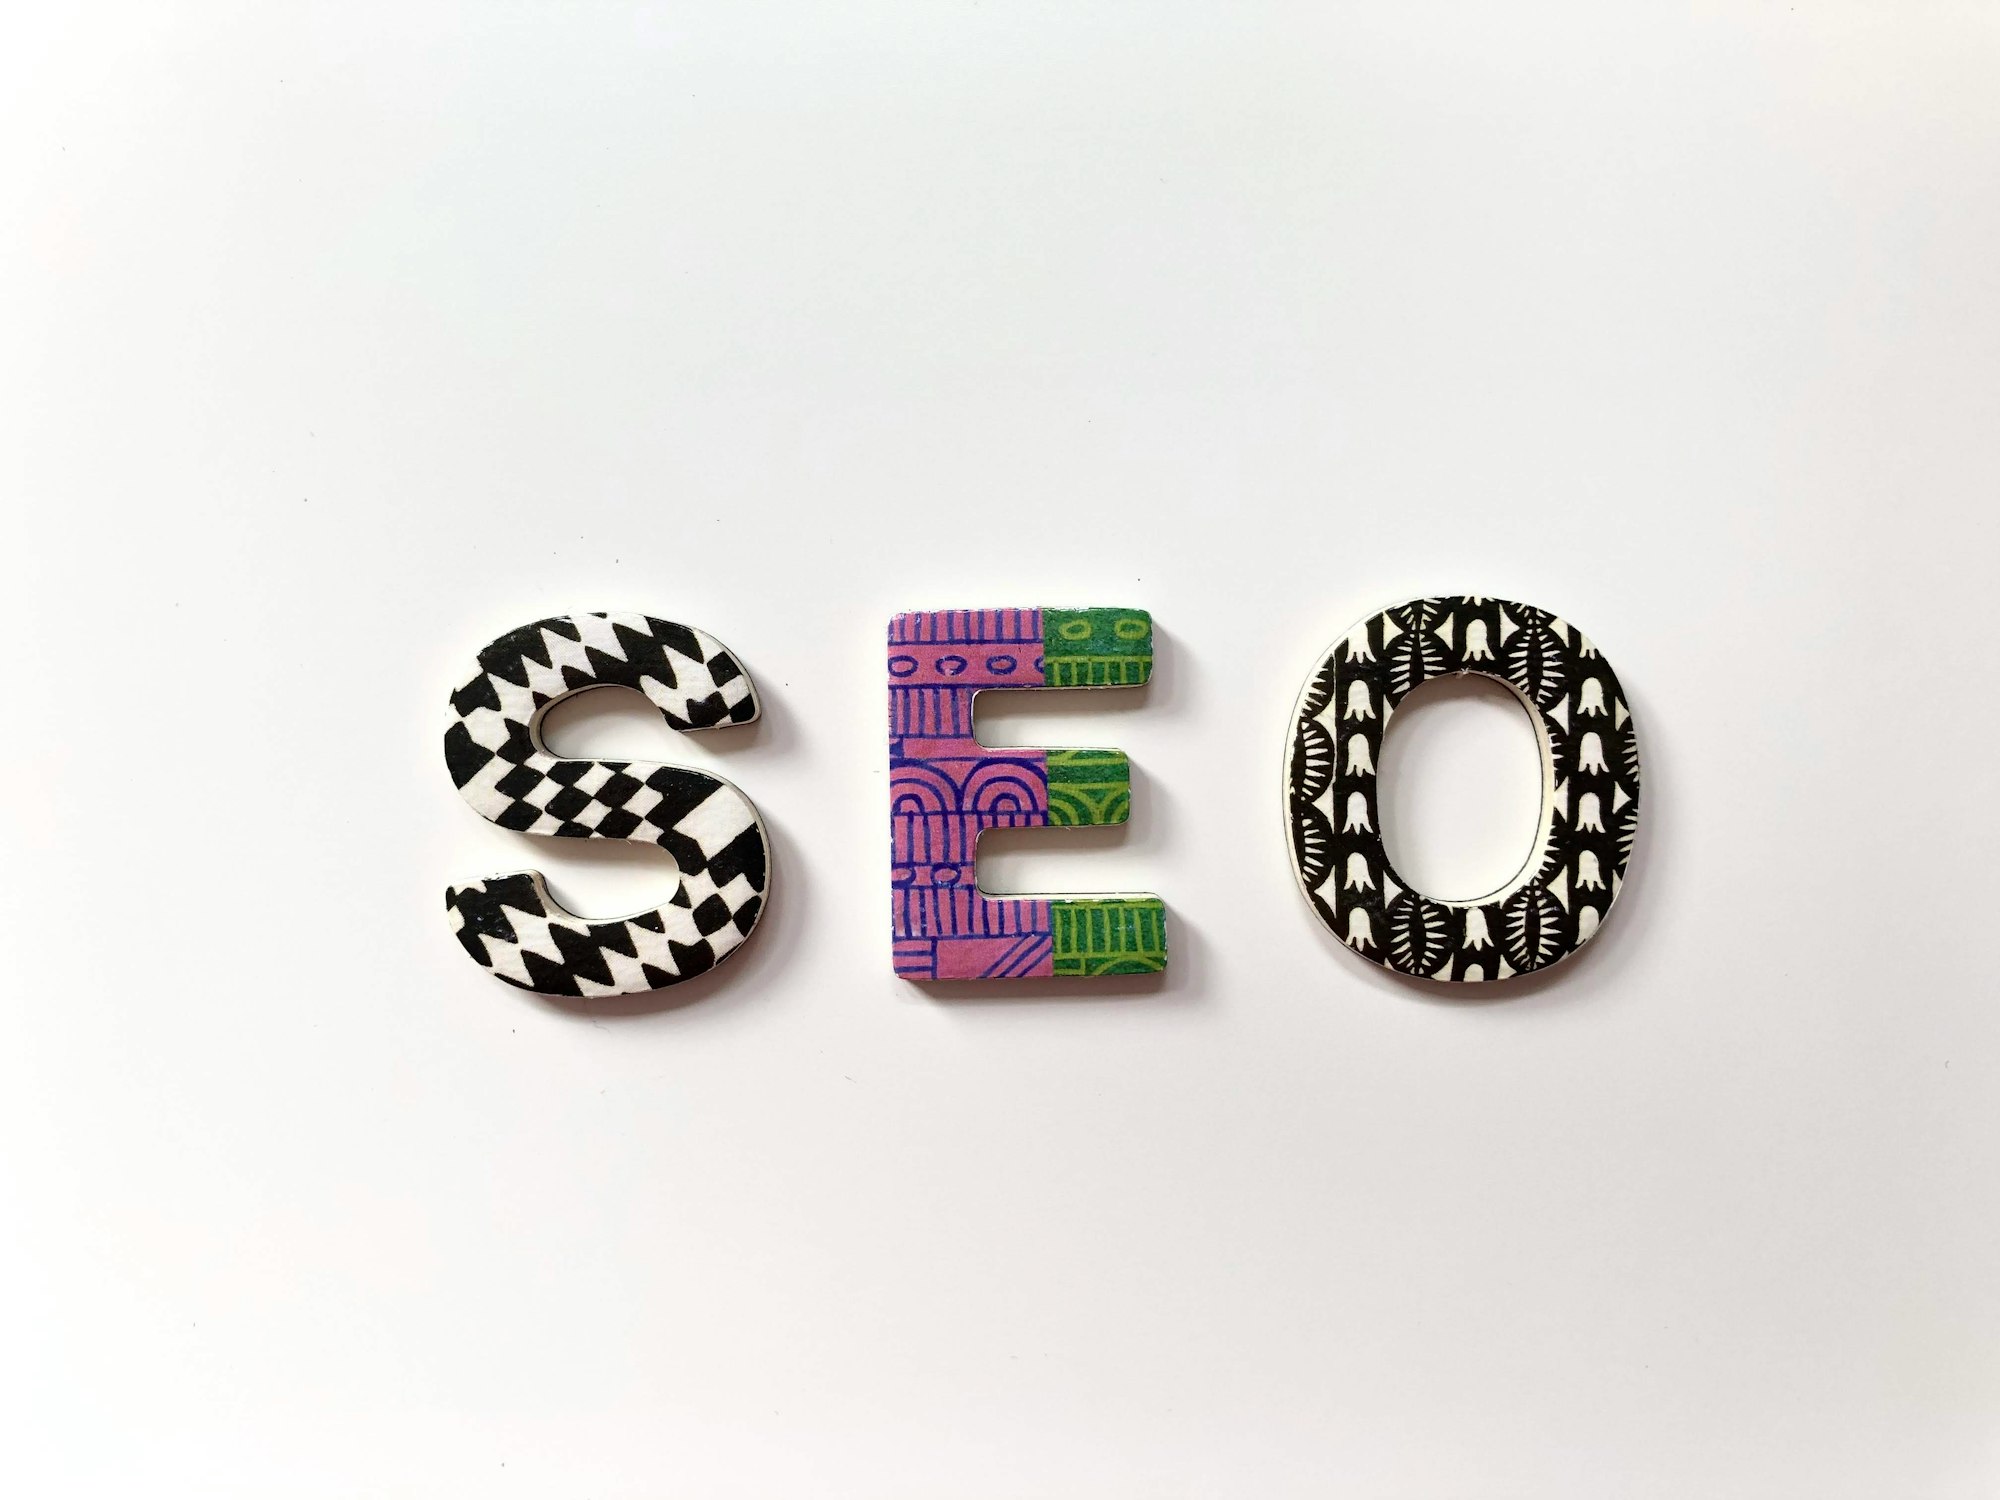 A Comprehensive Guide to SEO for Small Business Website